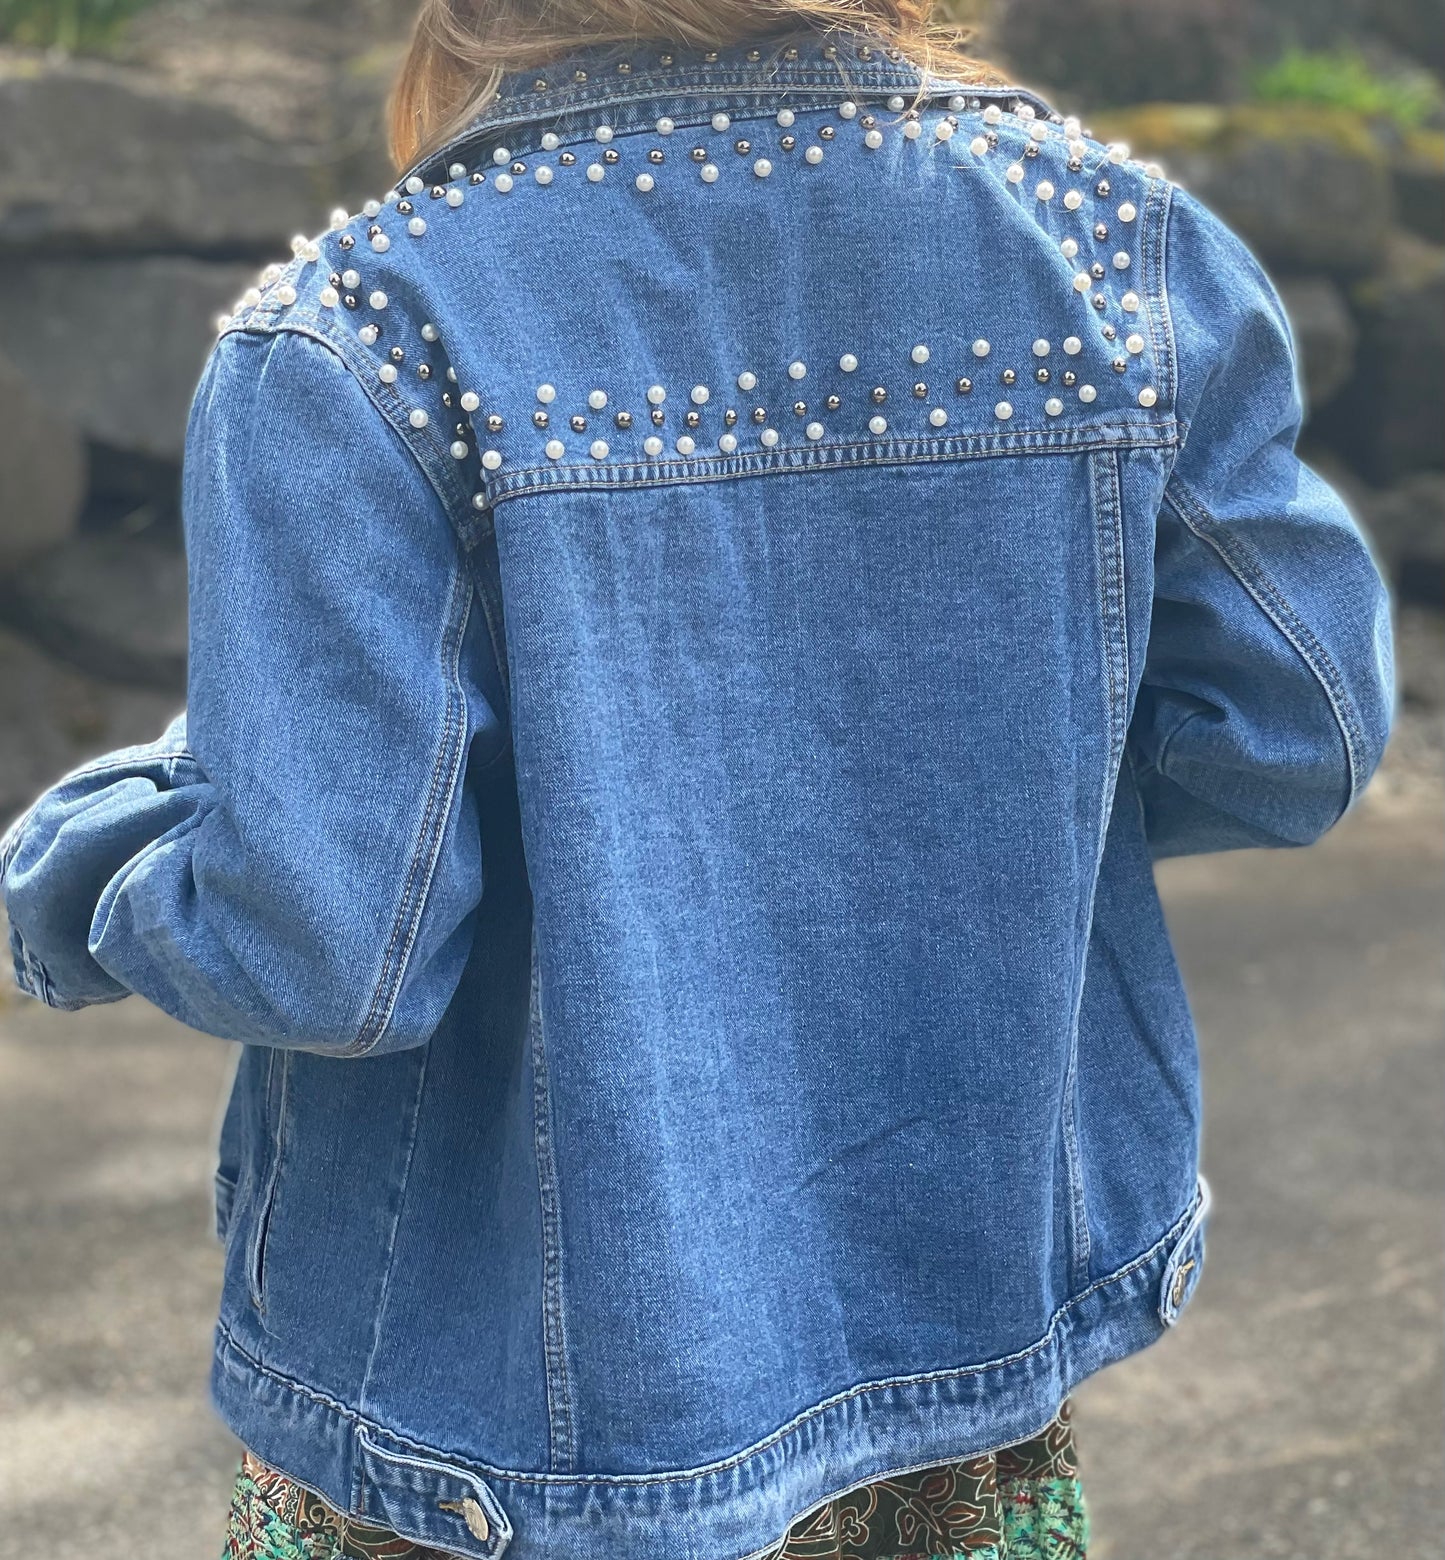 Jean Jacket with Pearls  ~"With the Band"